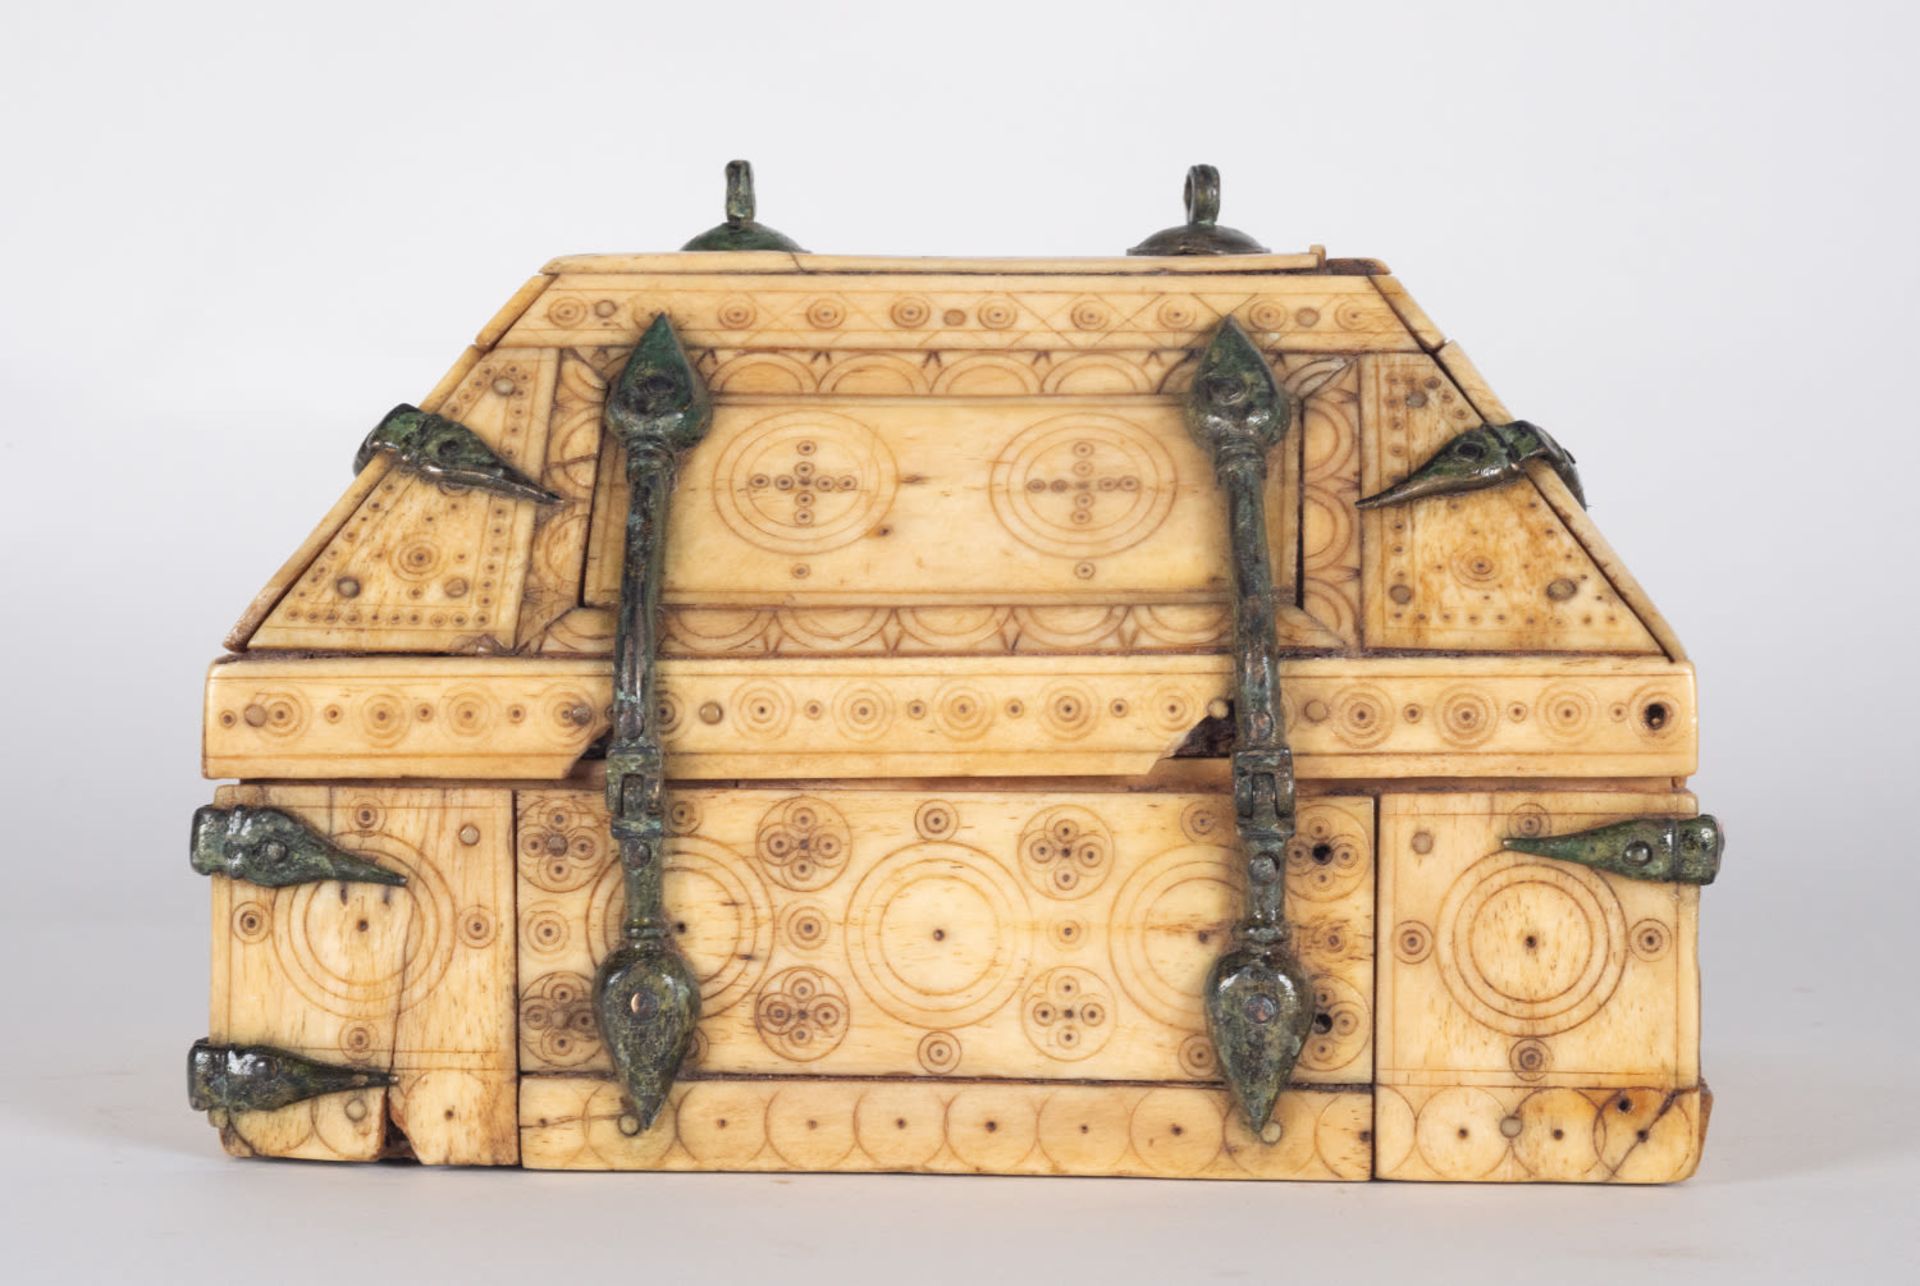 Rare bone box and wrought iron Siculo - Norman casket in the Germanic or Norman style, ex-european p - Bild 11 aus 13